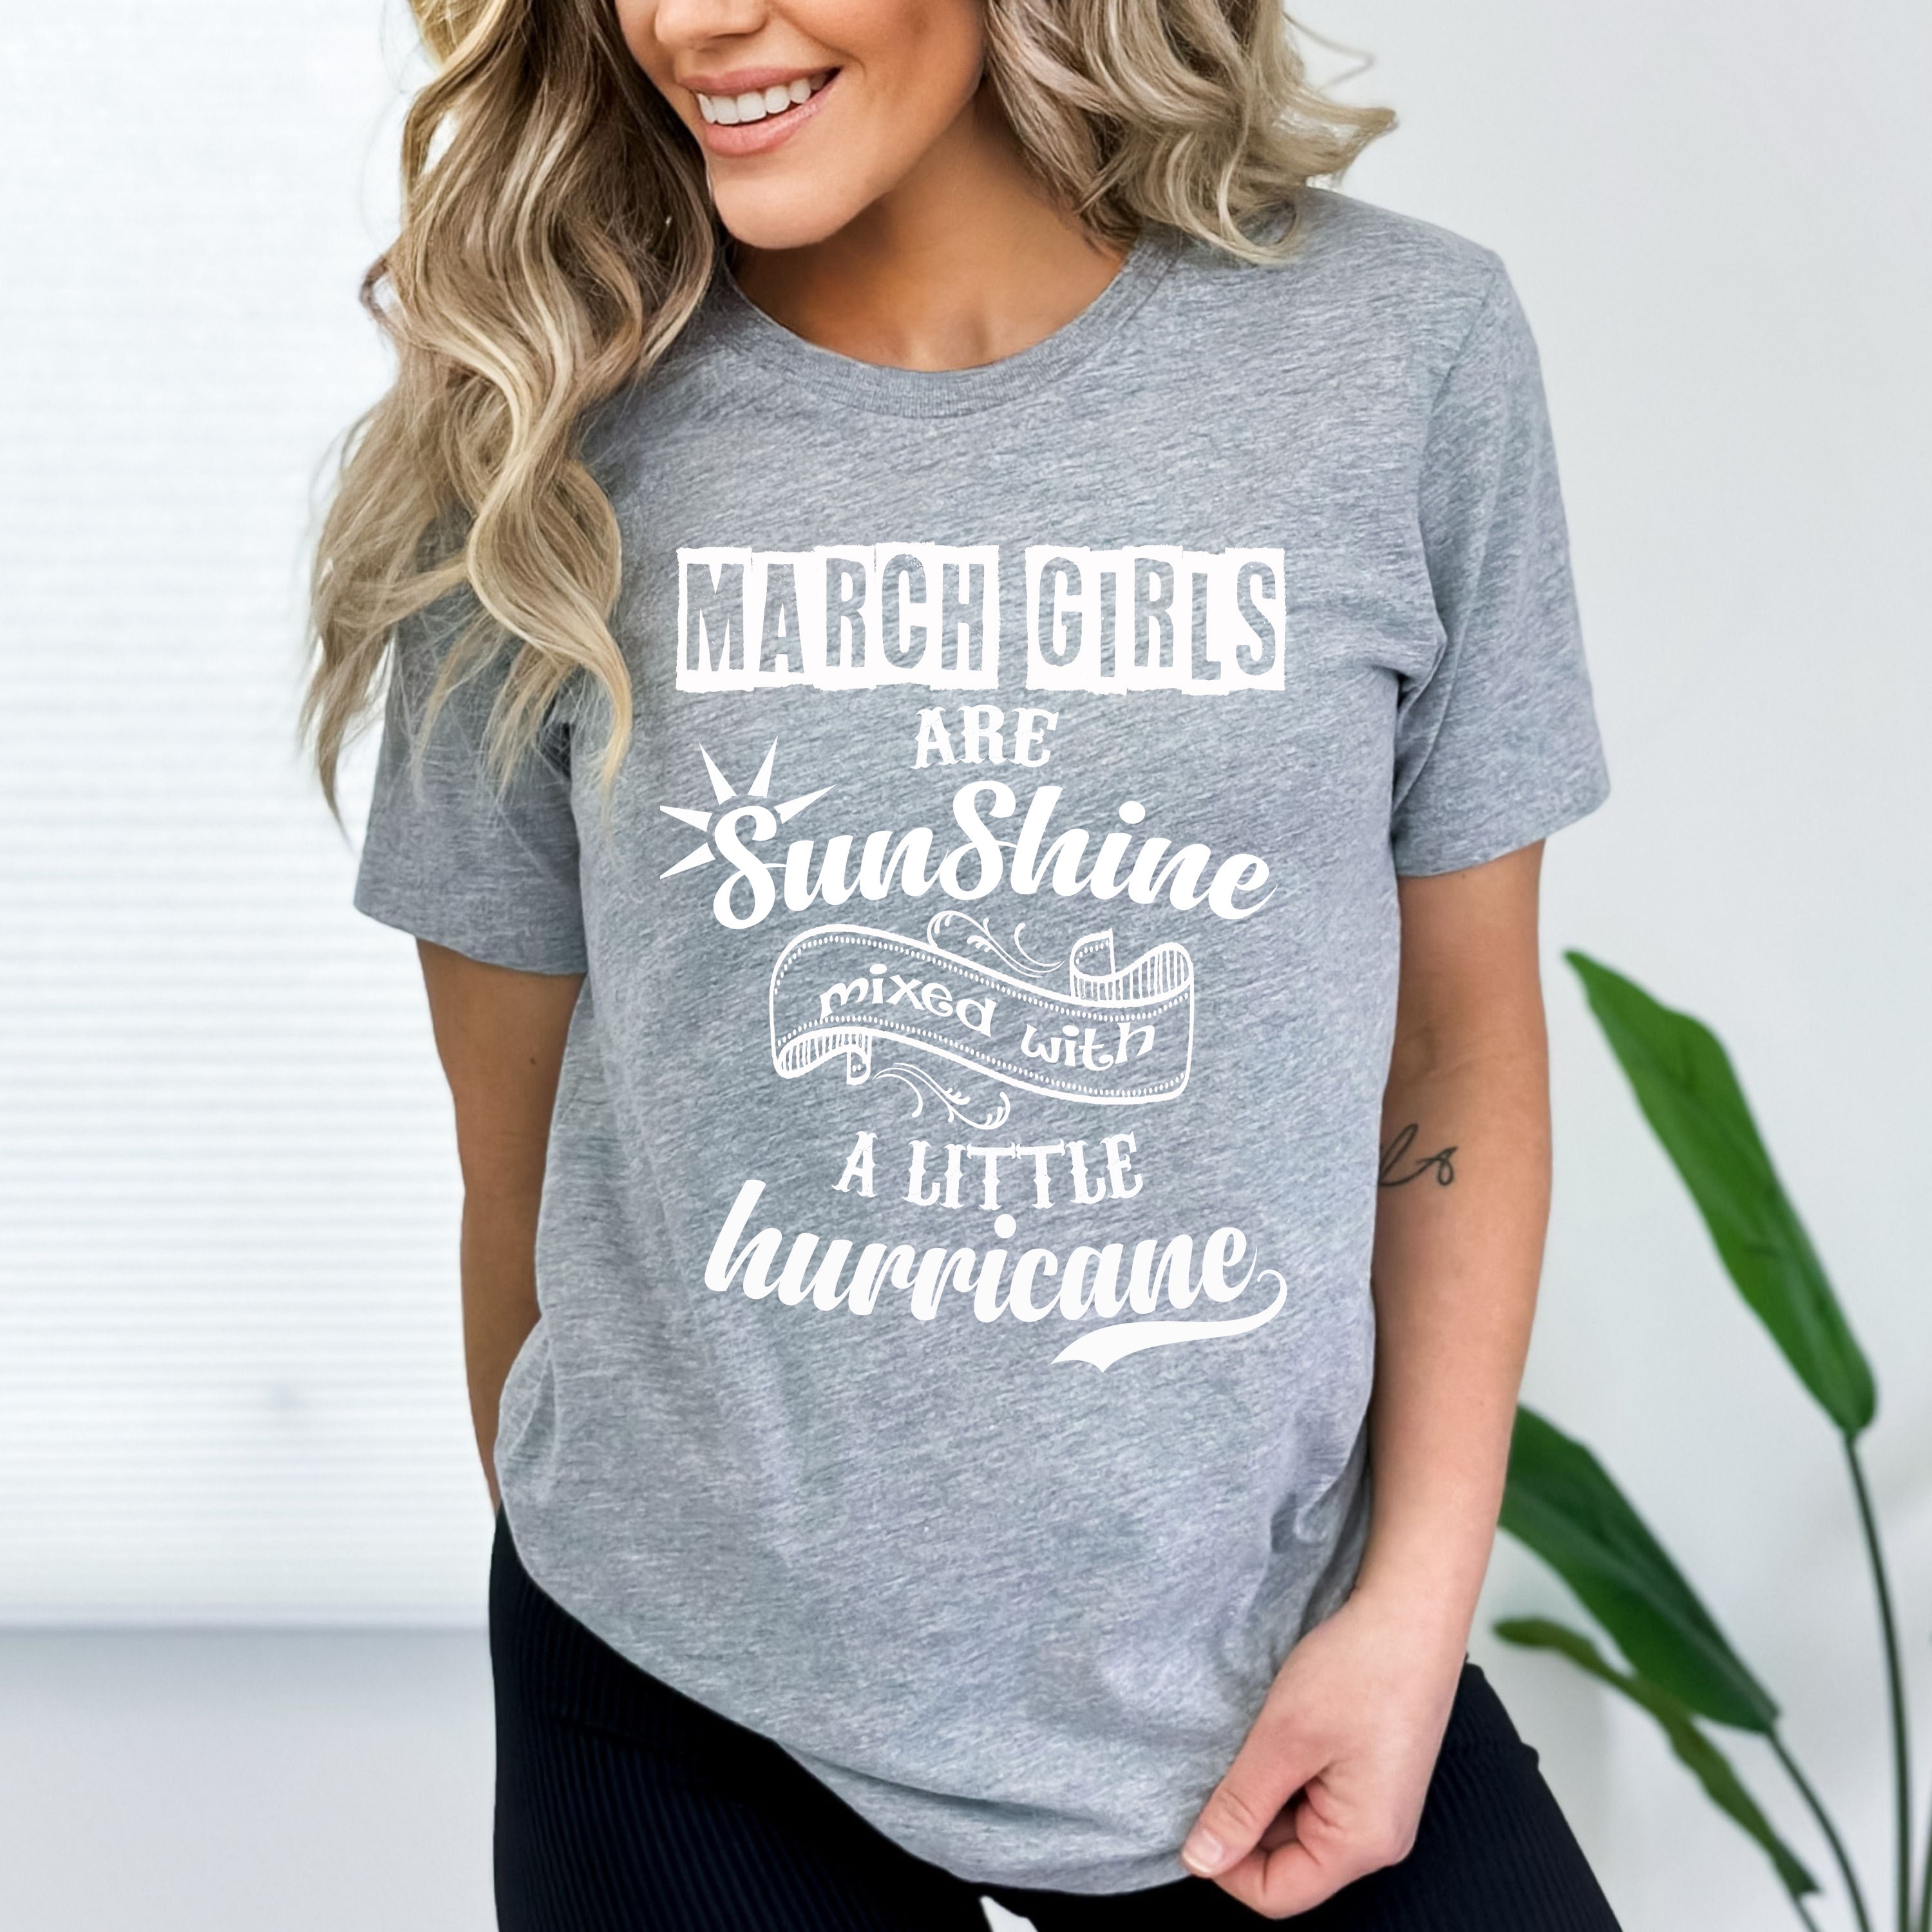 "March Girls Are Sunshine Mixed With Hurricane"